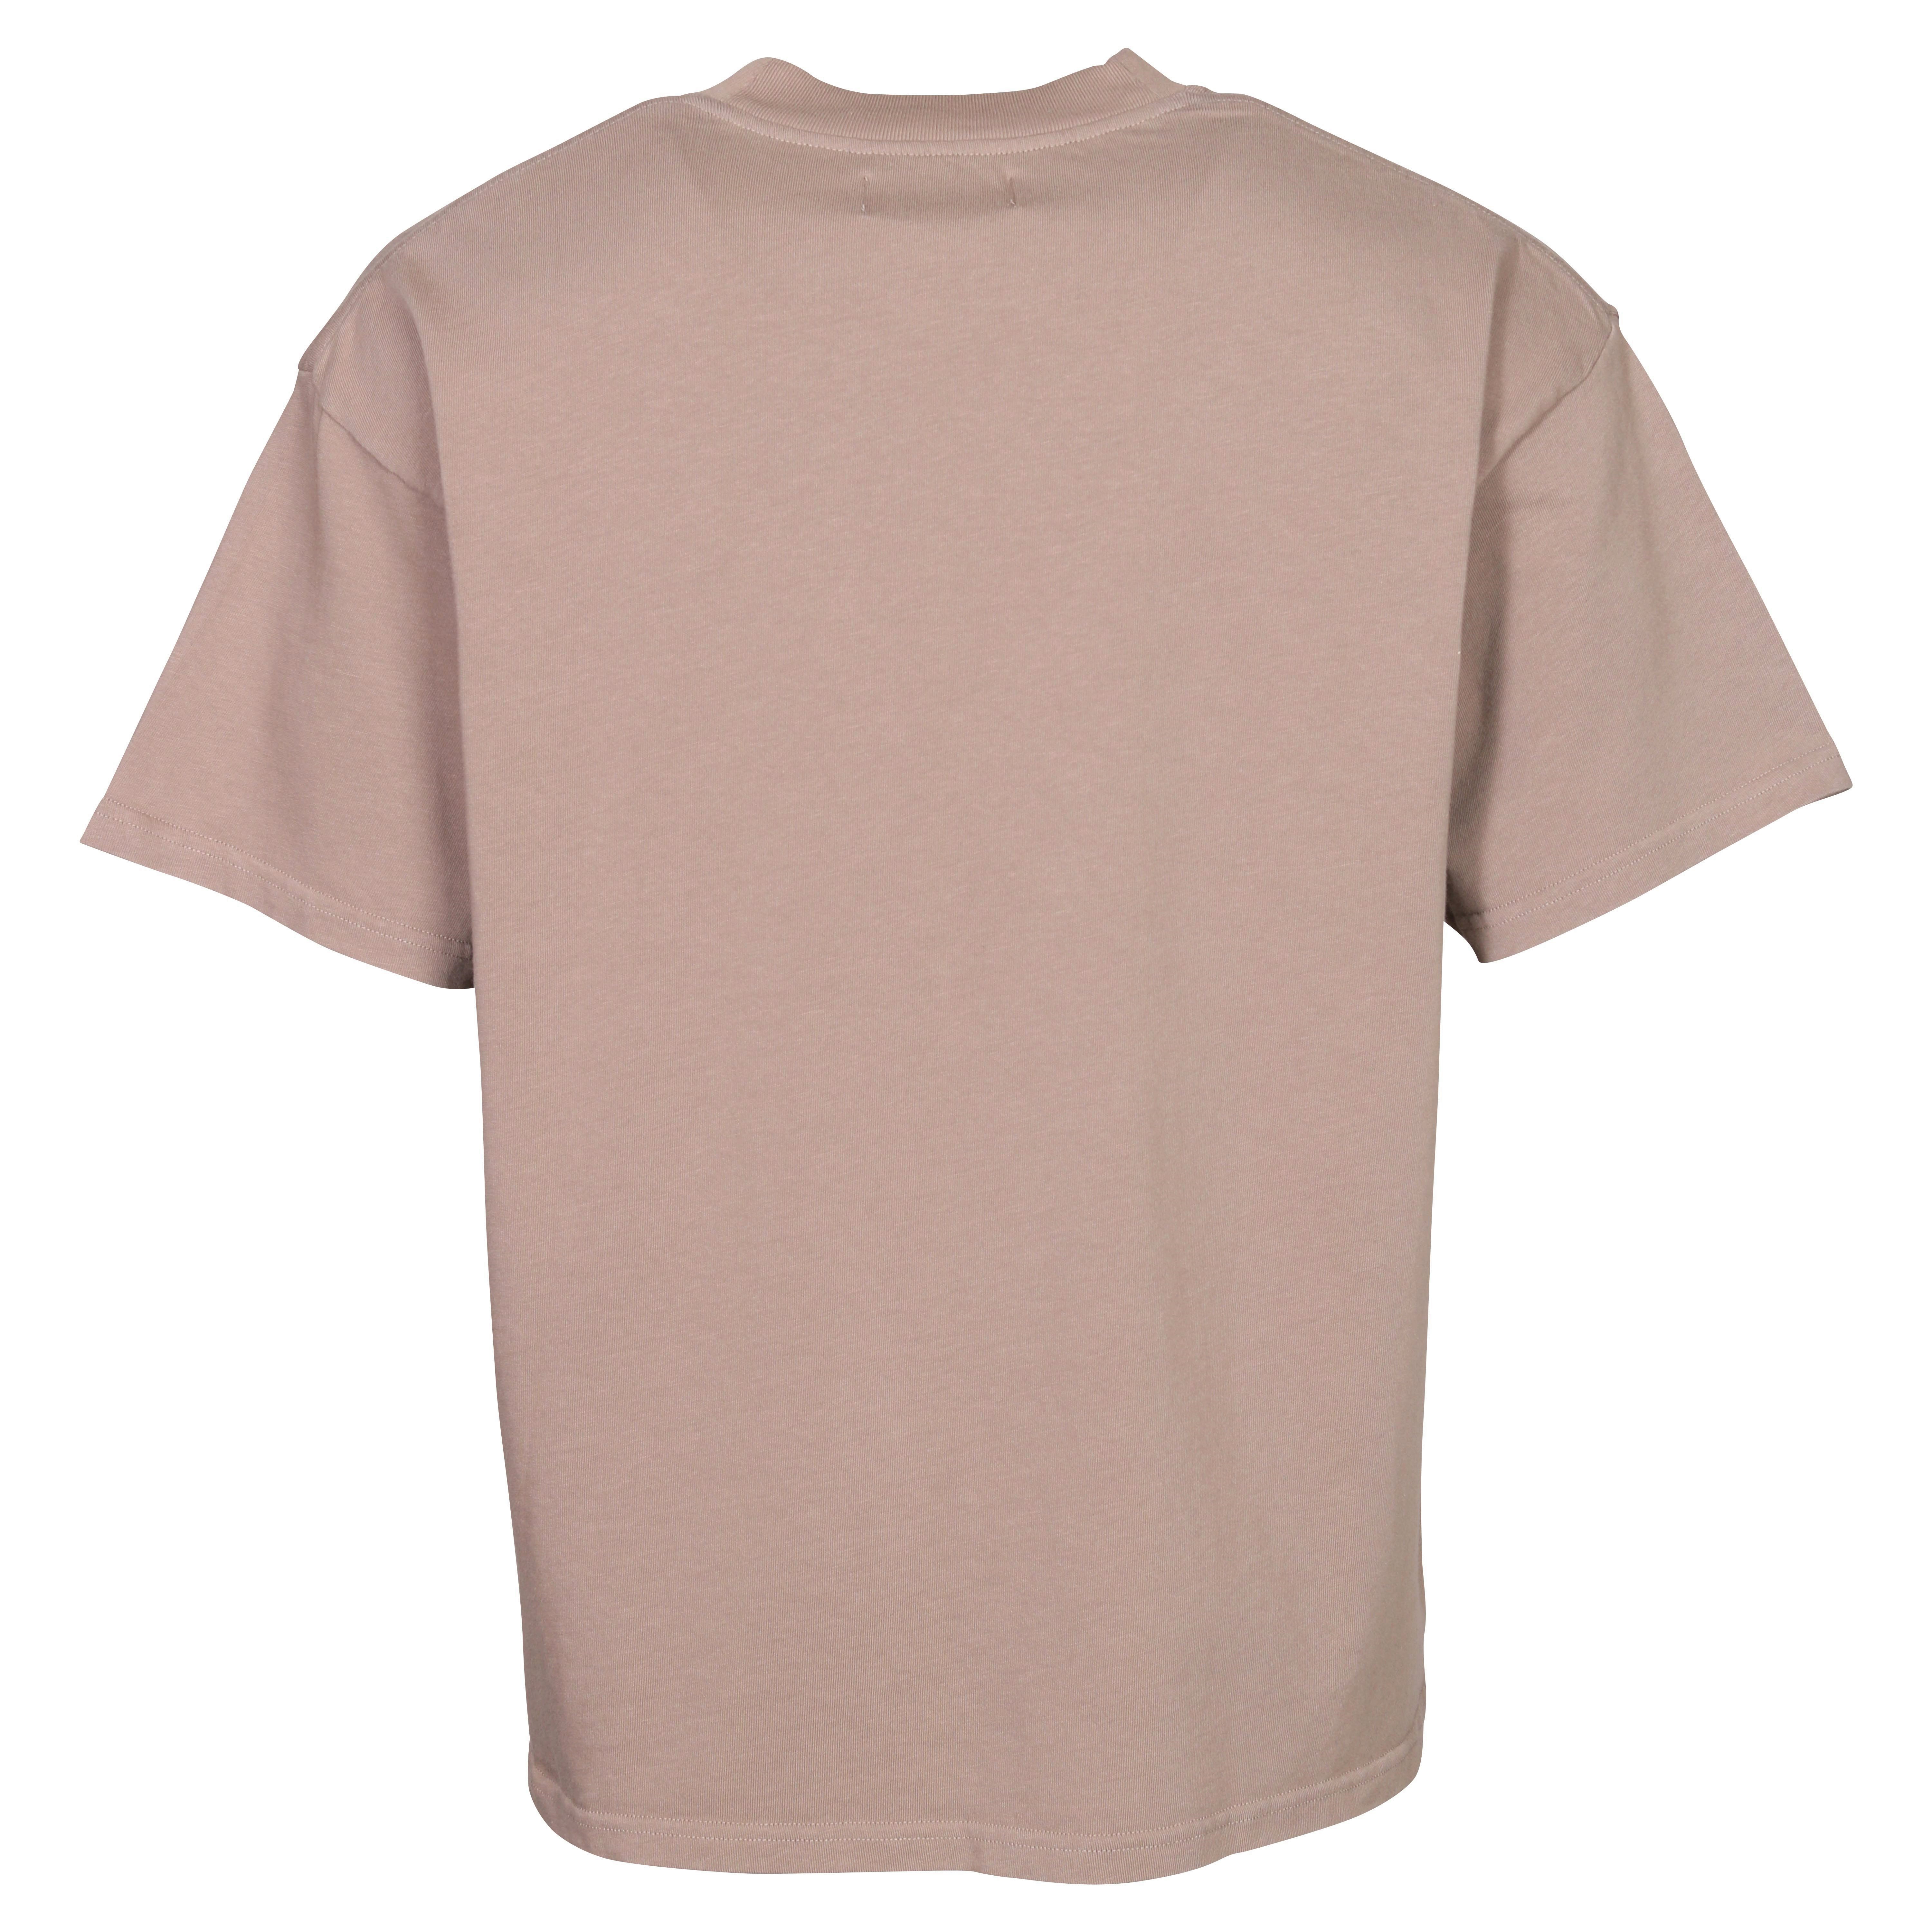 Represent Blank T-Shirt in Taupe